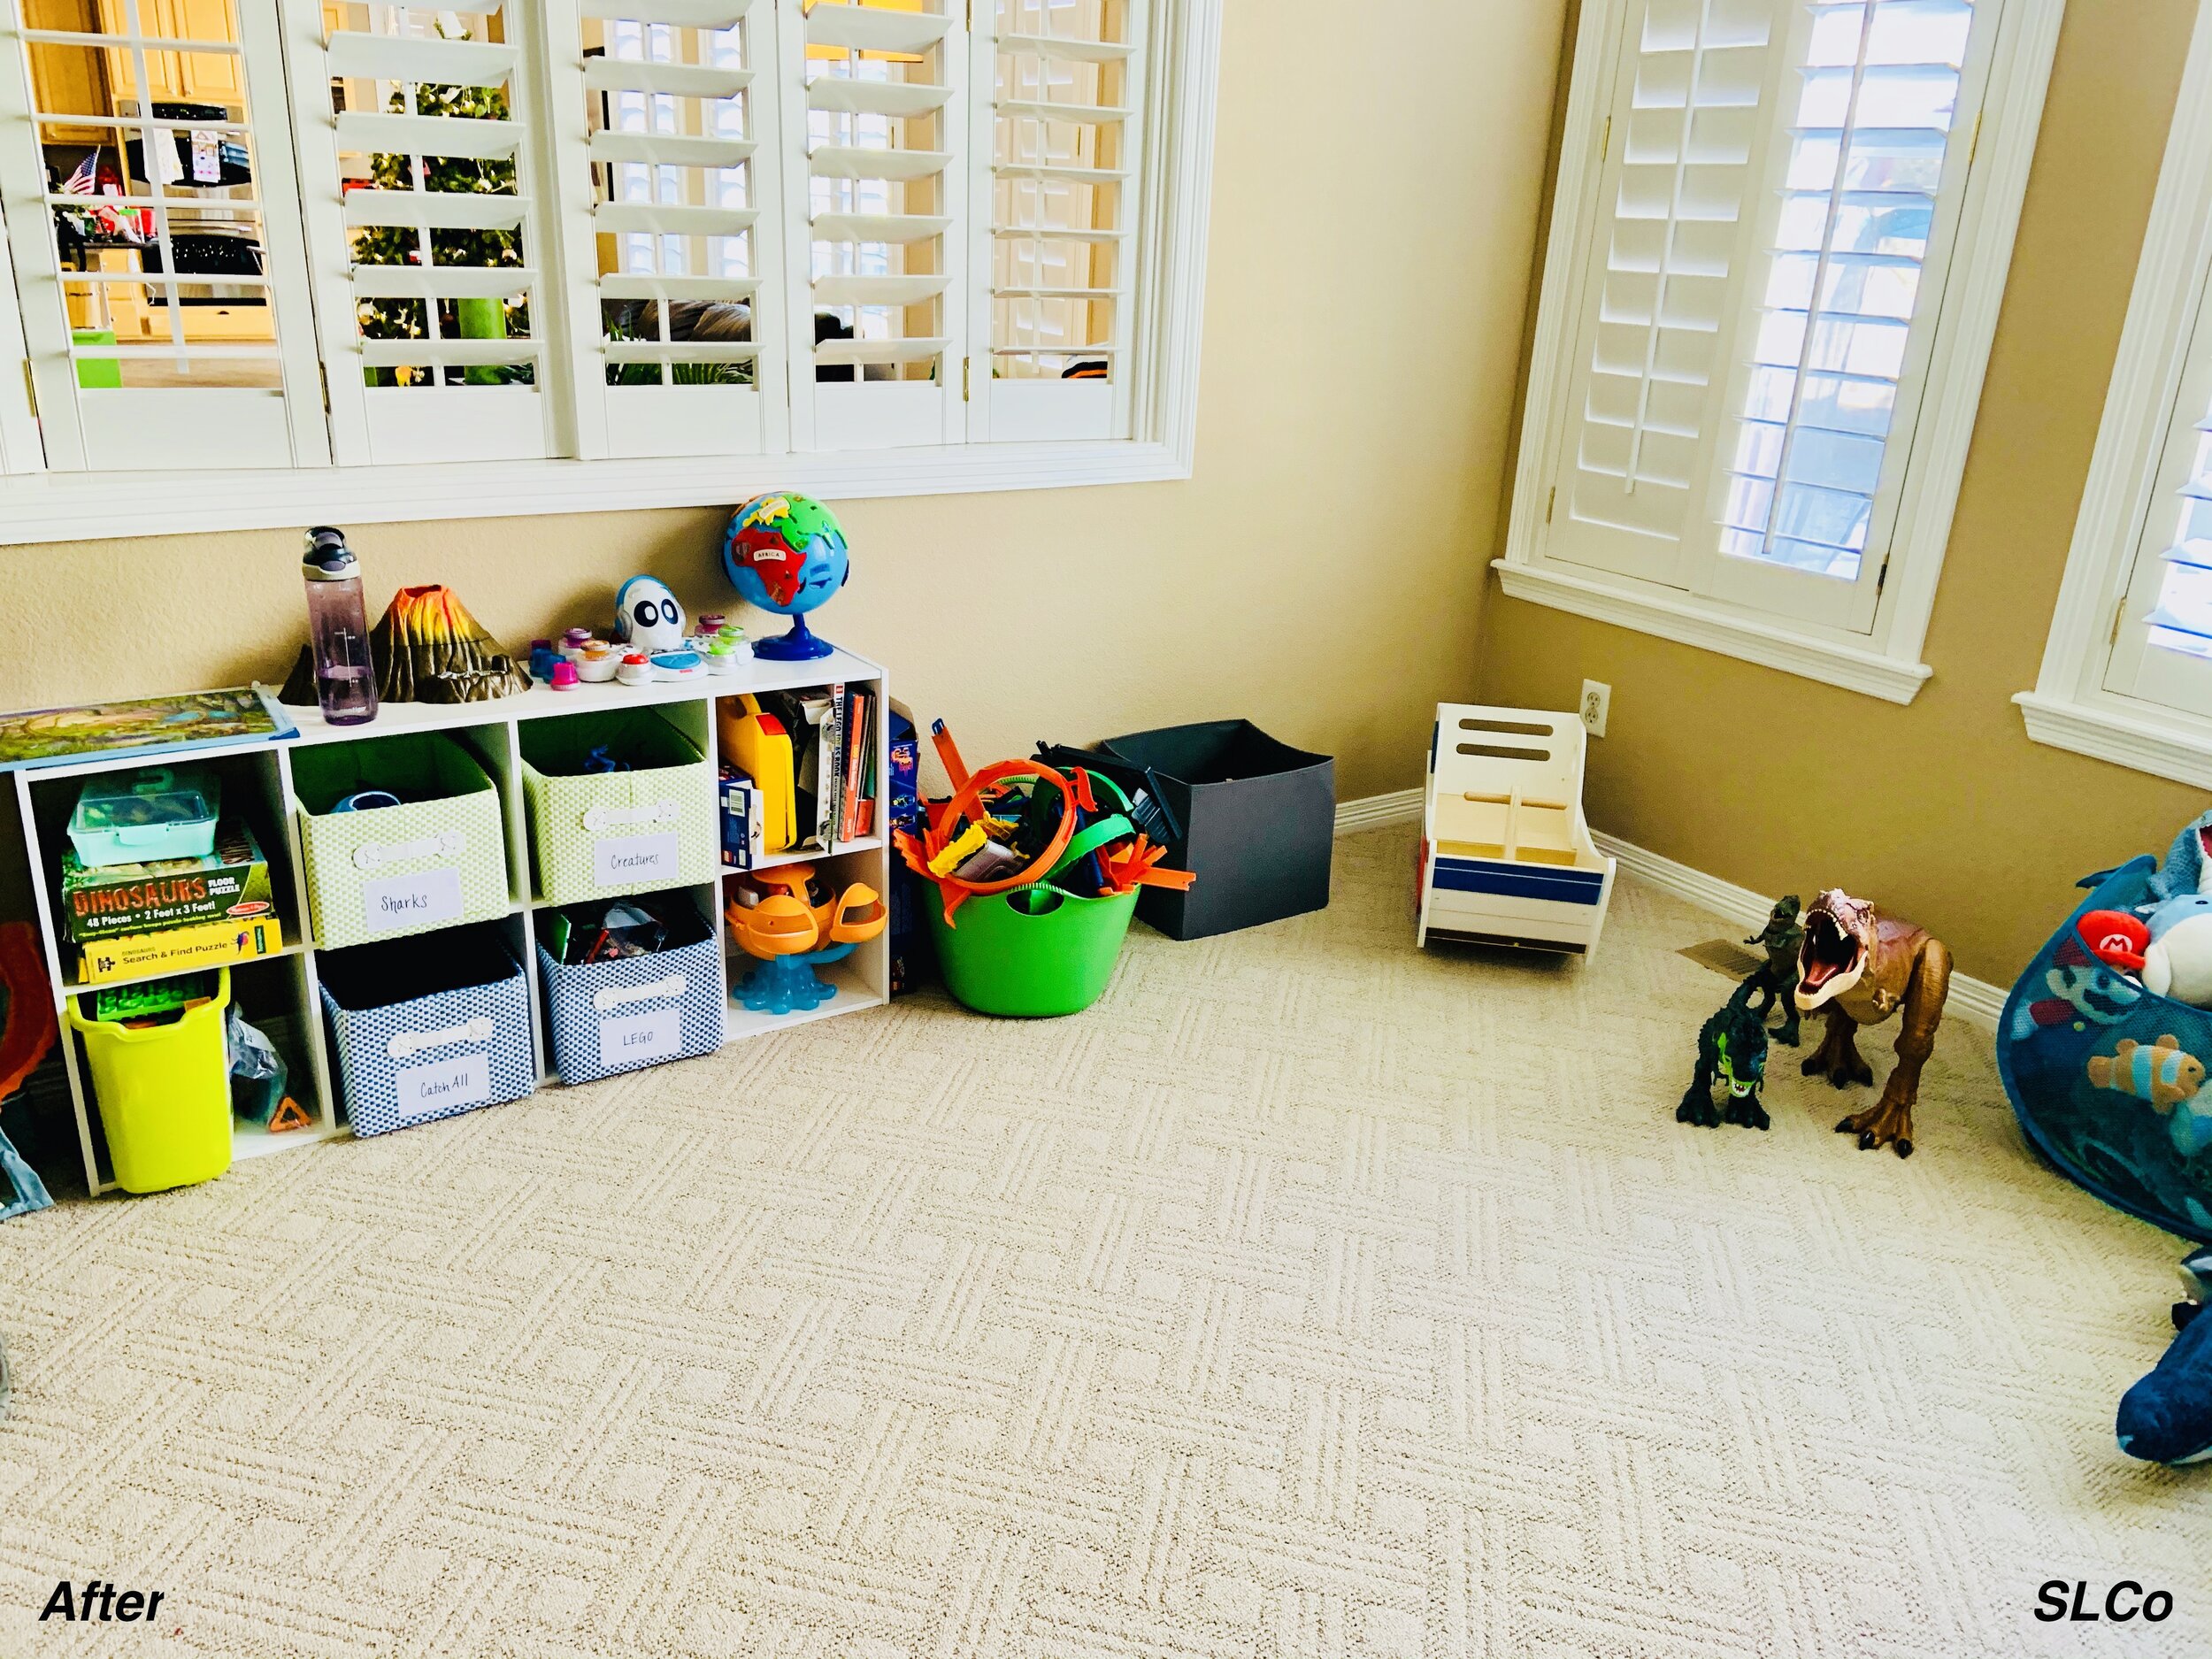 After photof of playroom with cubbies with cloth bins and items organized and nothing on the floor.